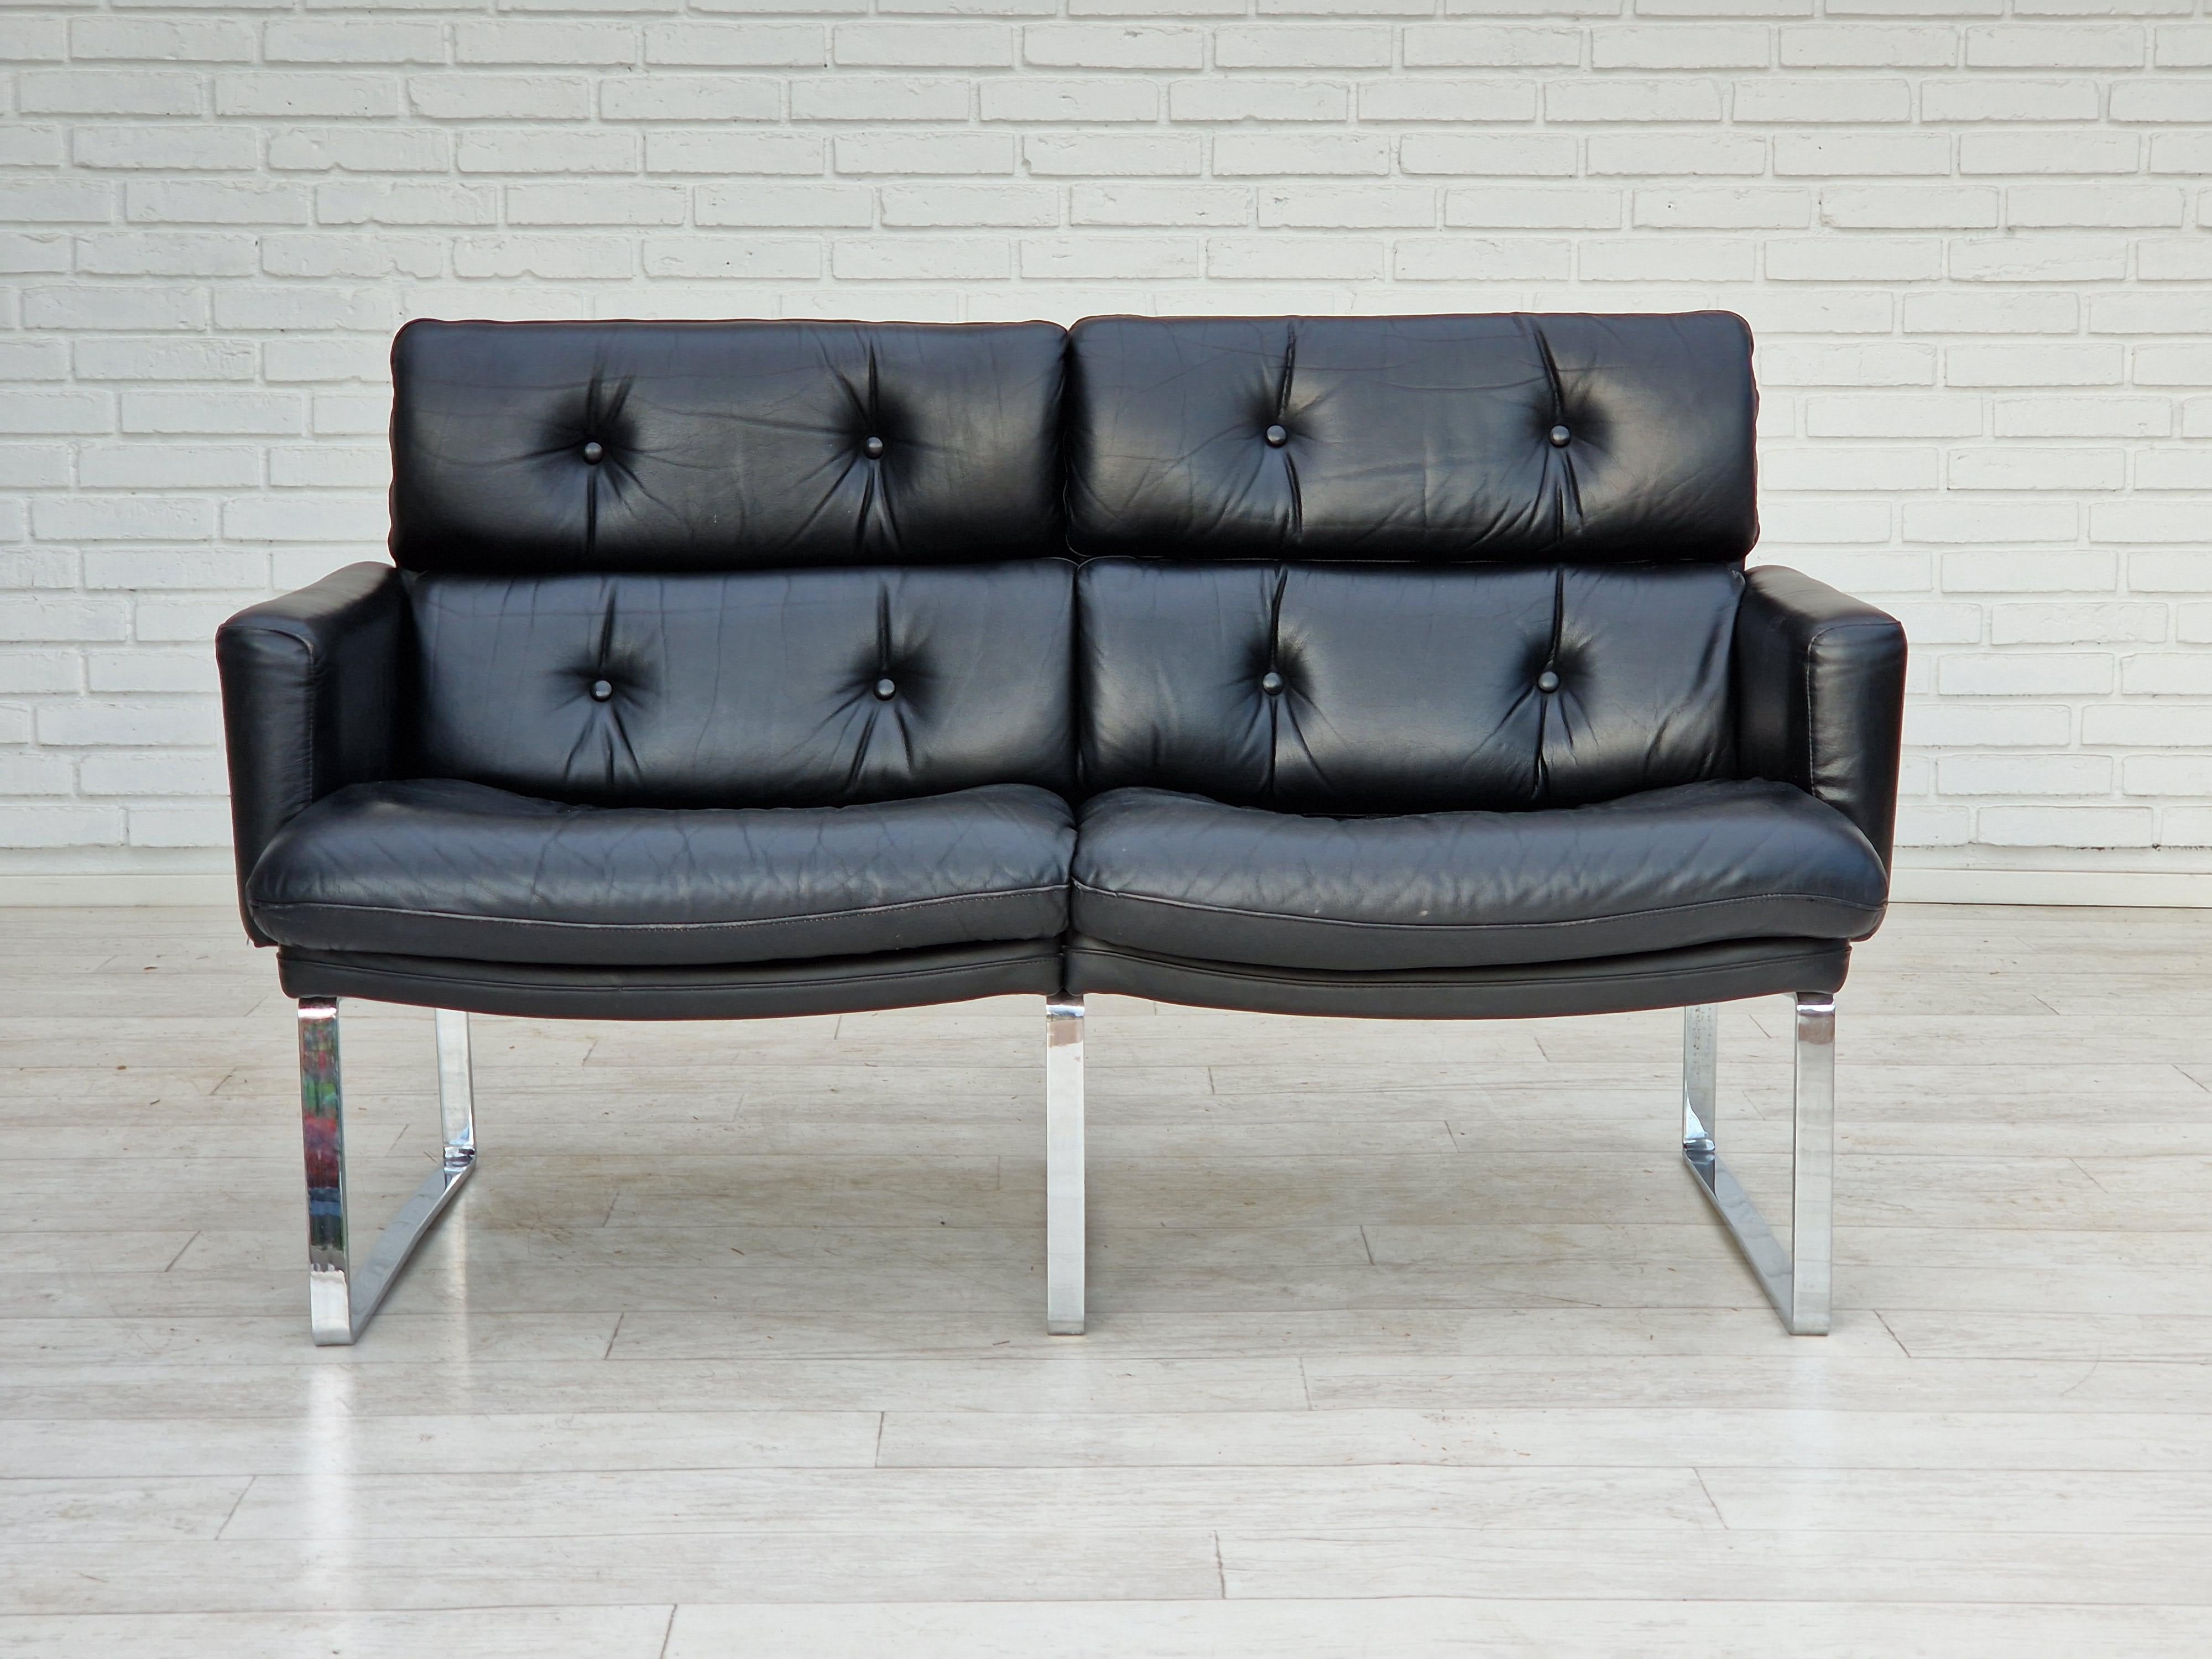 1970s, German design. Original 2 seater sofa in black leather. Chrome steel legs. Original very good condition: no smells and no stains. Made by German furniture manufacturer in august 1976 ( quality control stamp.